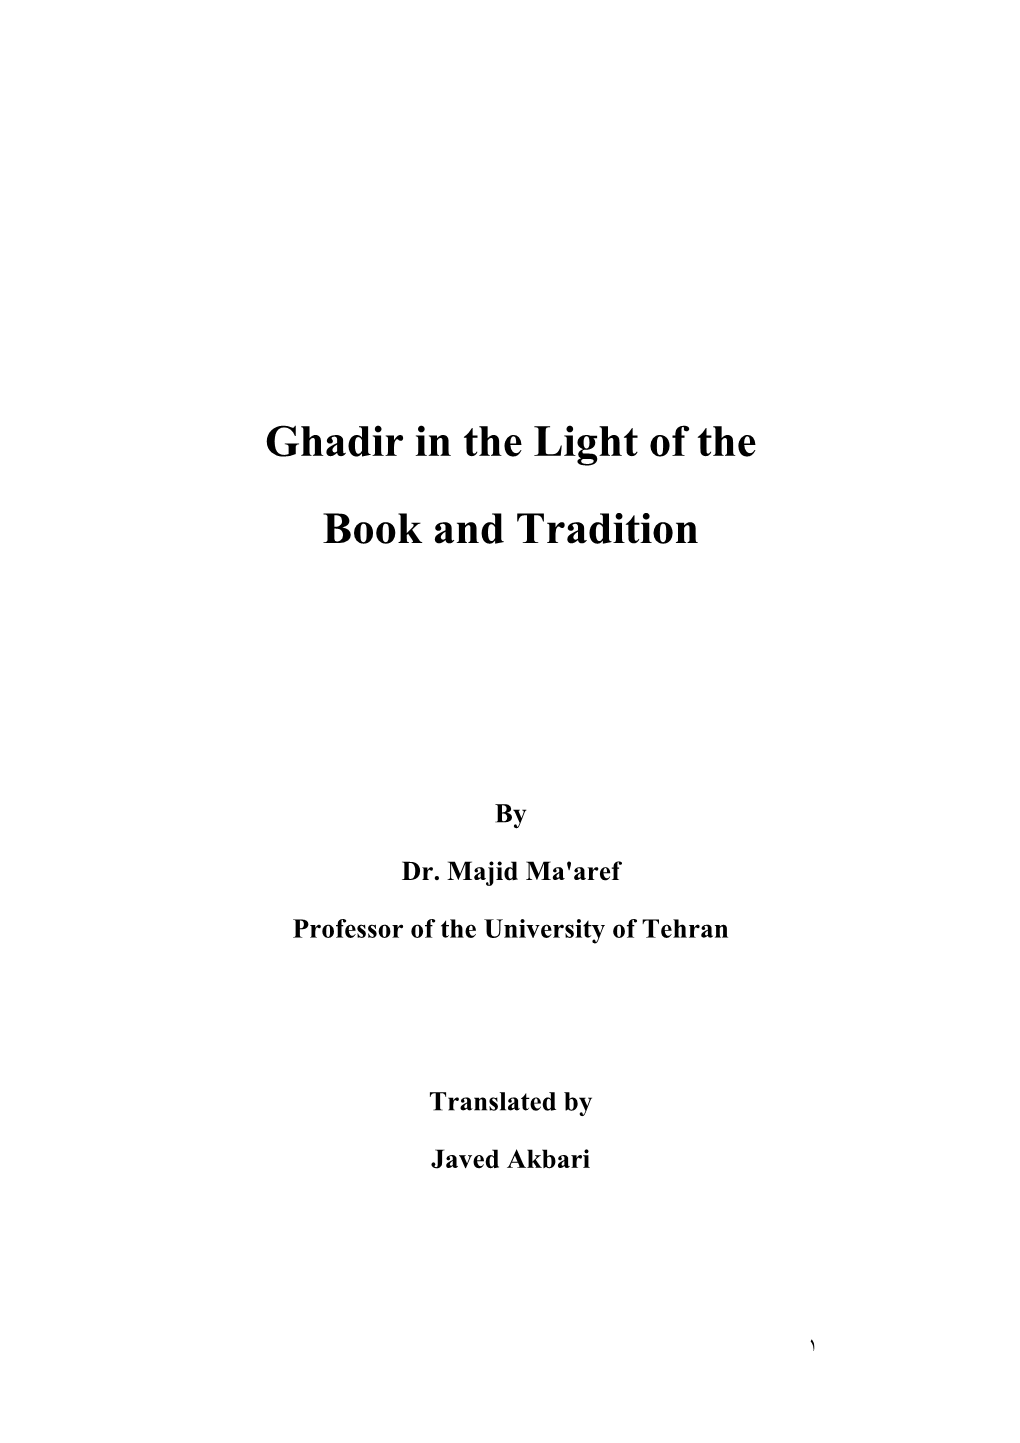 Ghadir in the Light of the Book and Tradition